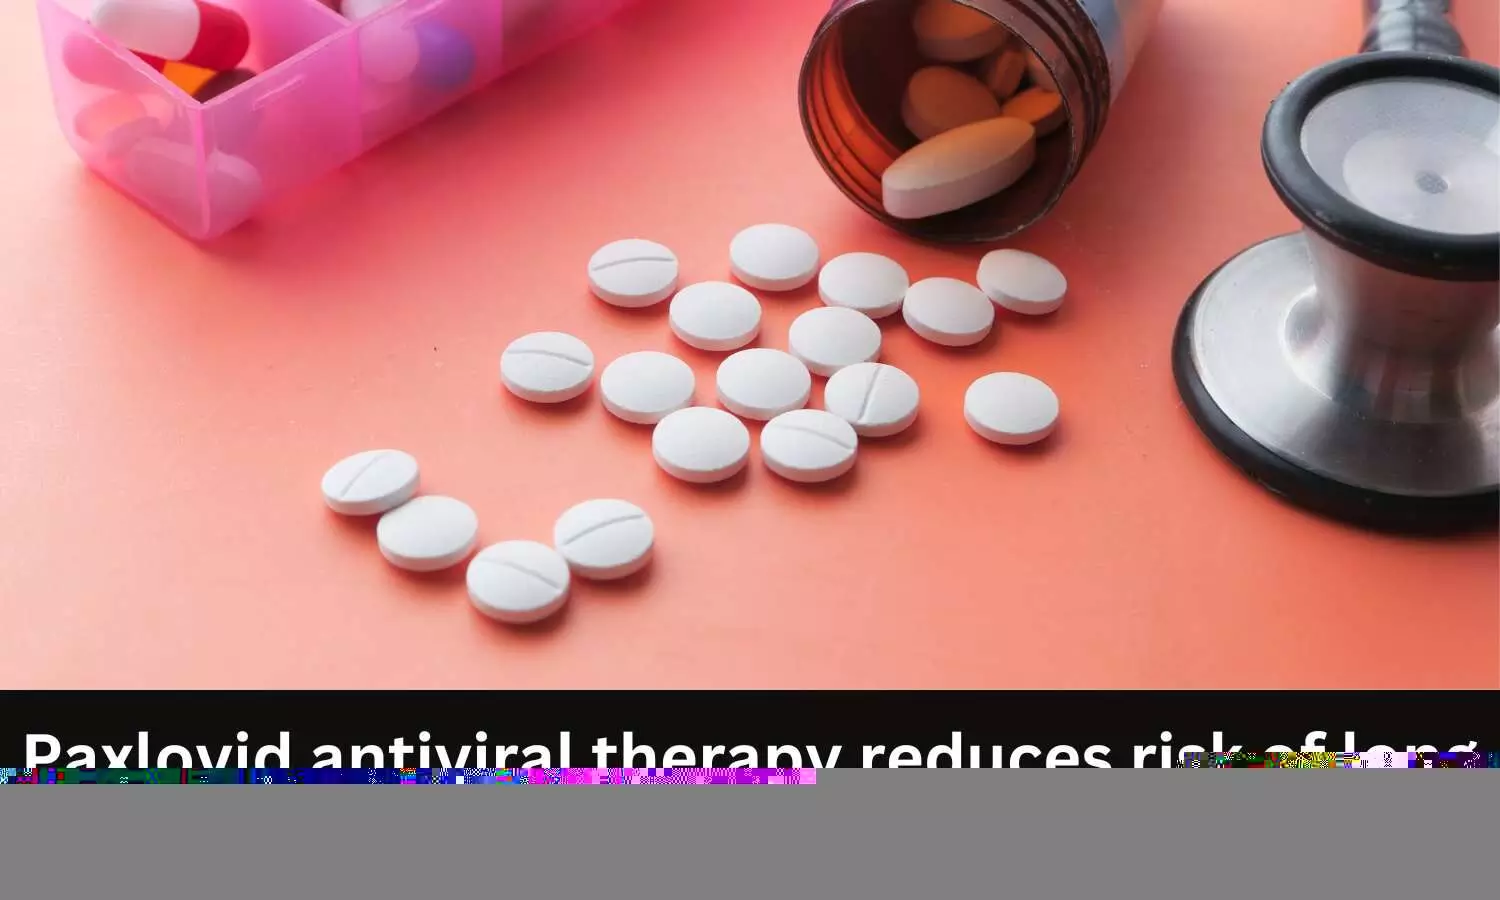 Paxlovid antiviral therapy reduces risk of long COVID